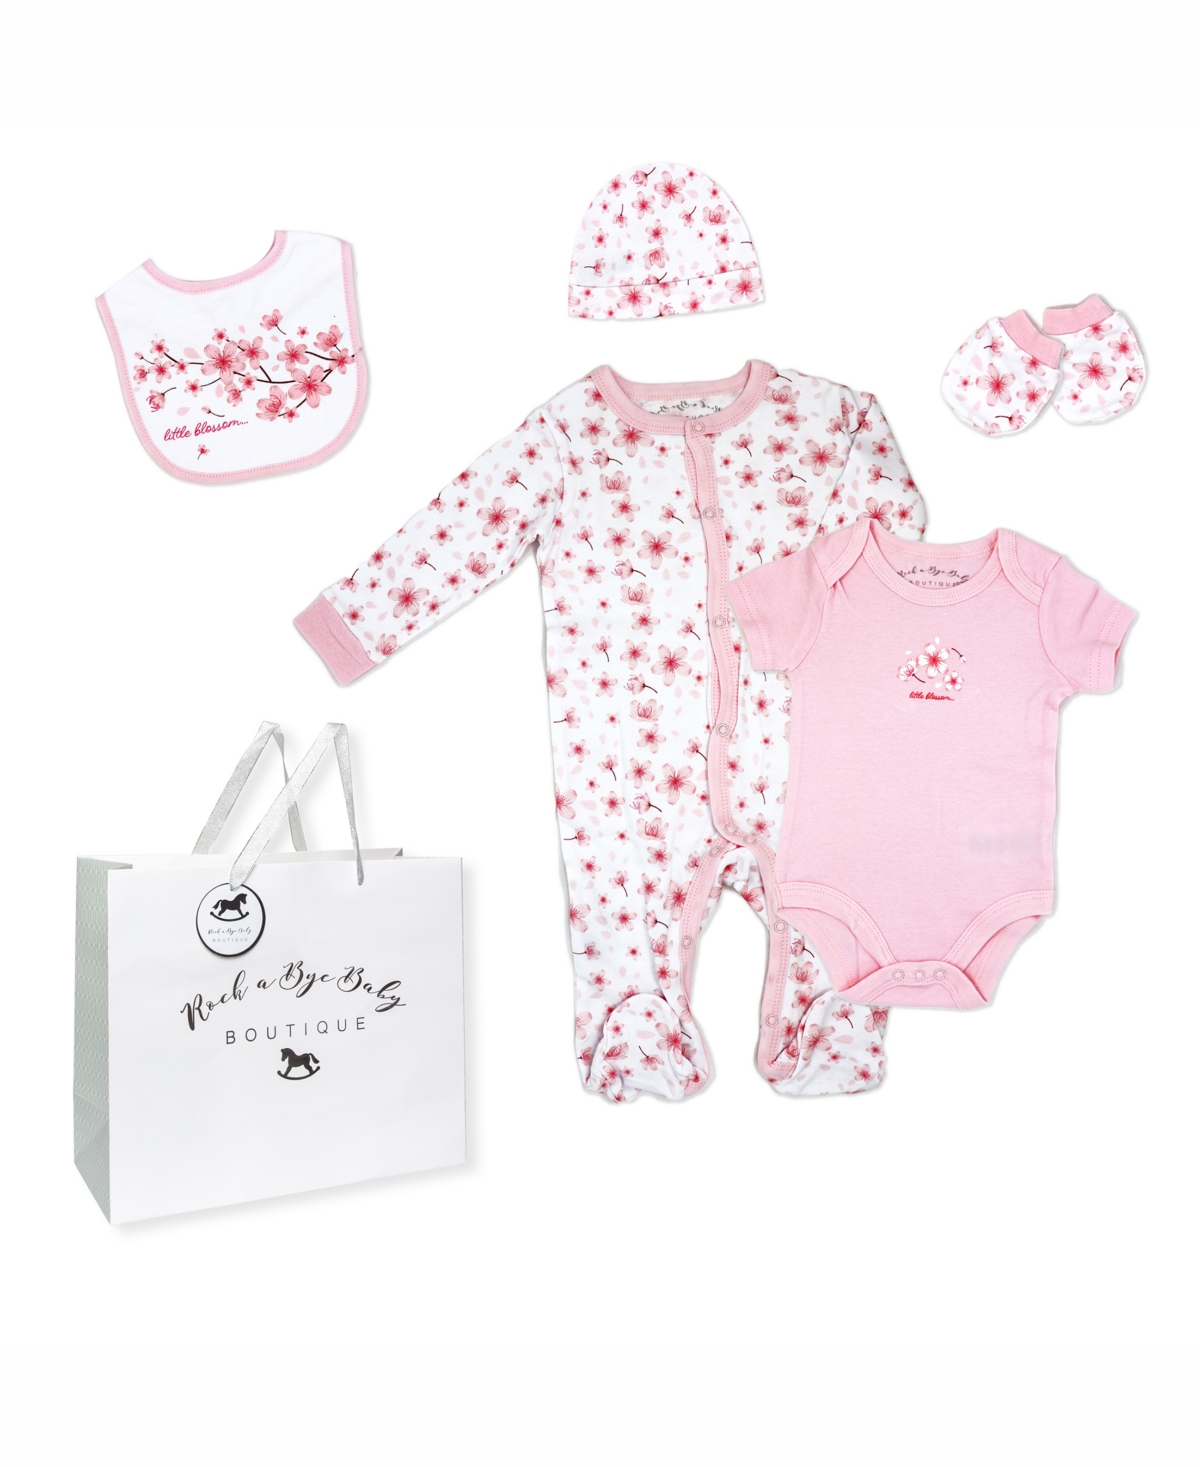 Rock-a-bye Baby Boutique Baby Girls Layette Gift Bag Set In Cherry Blossoms